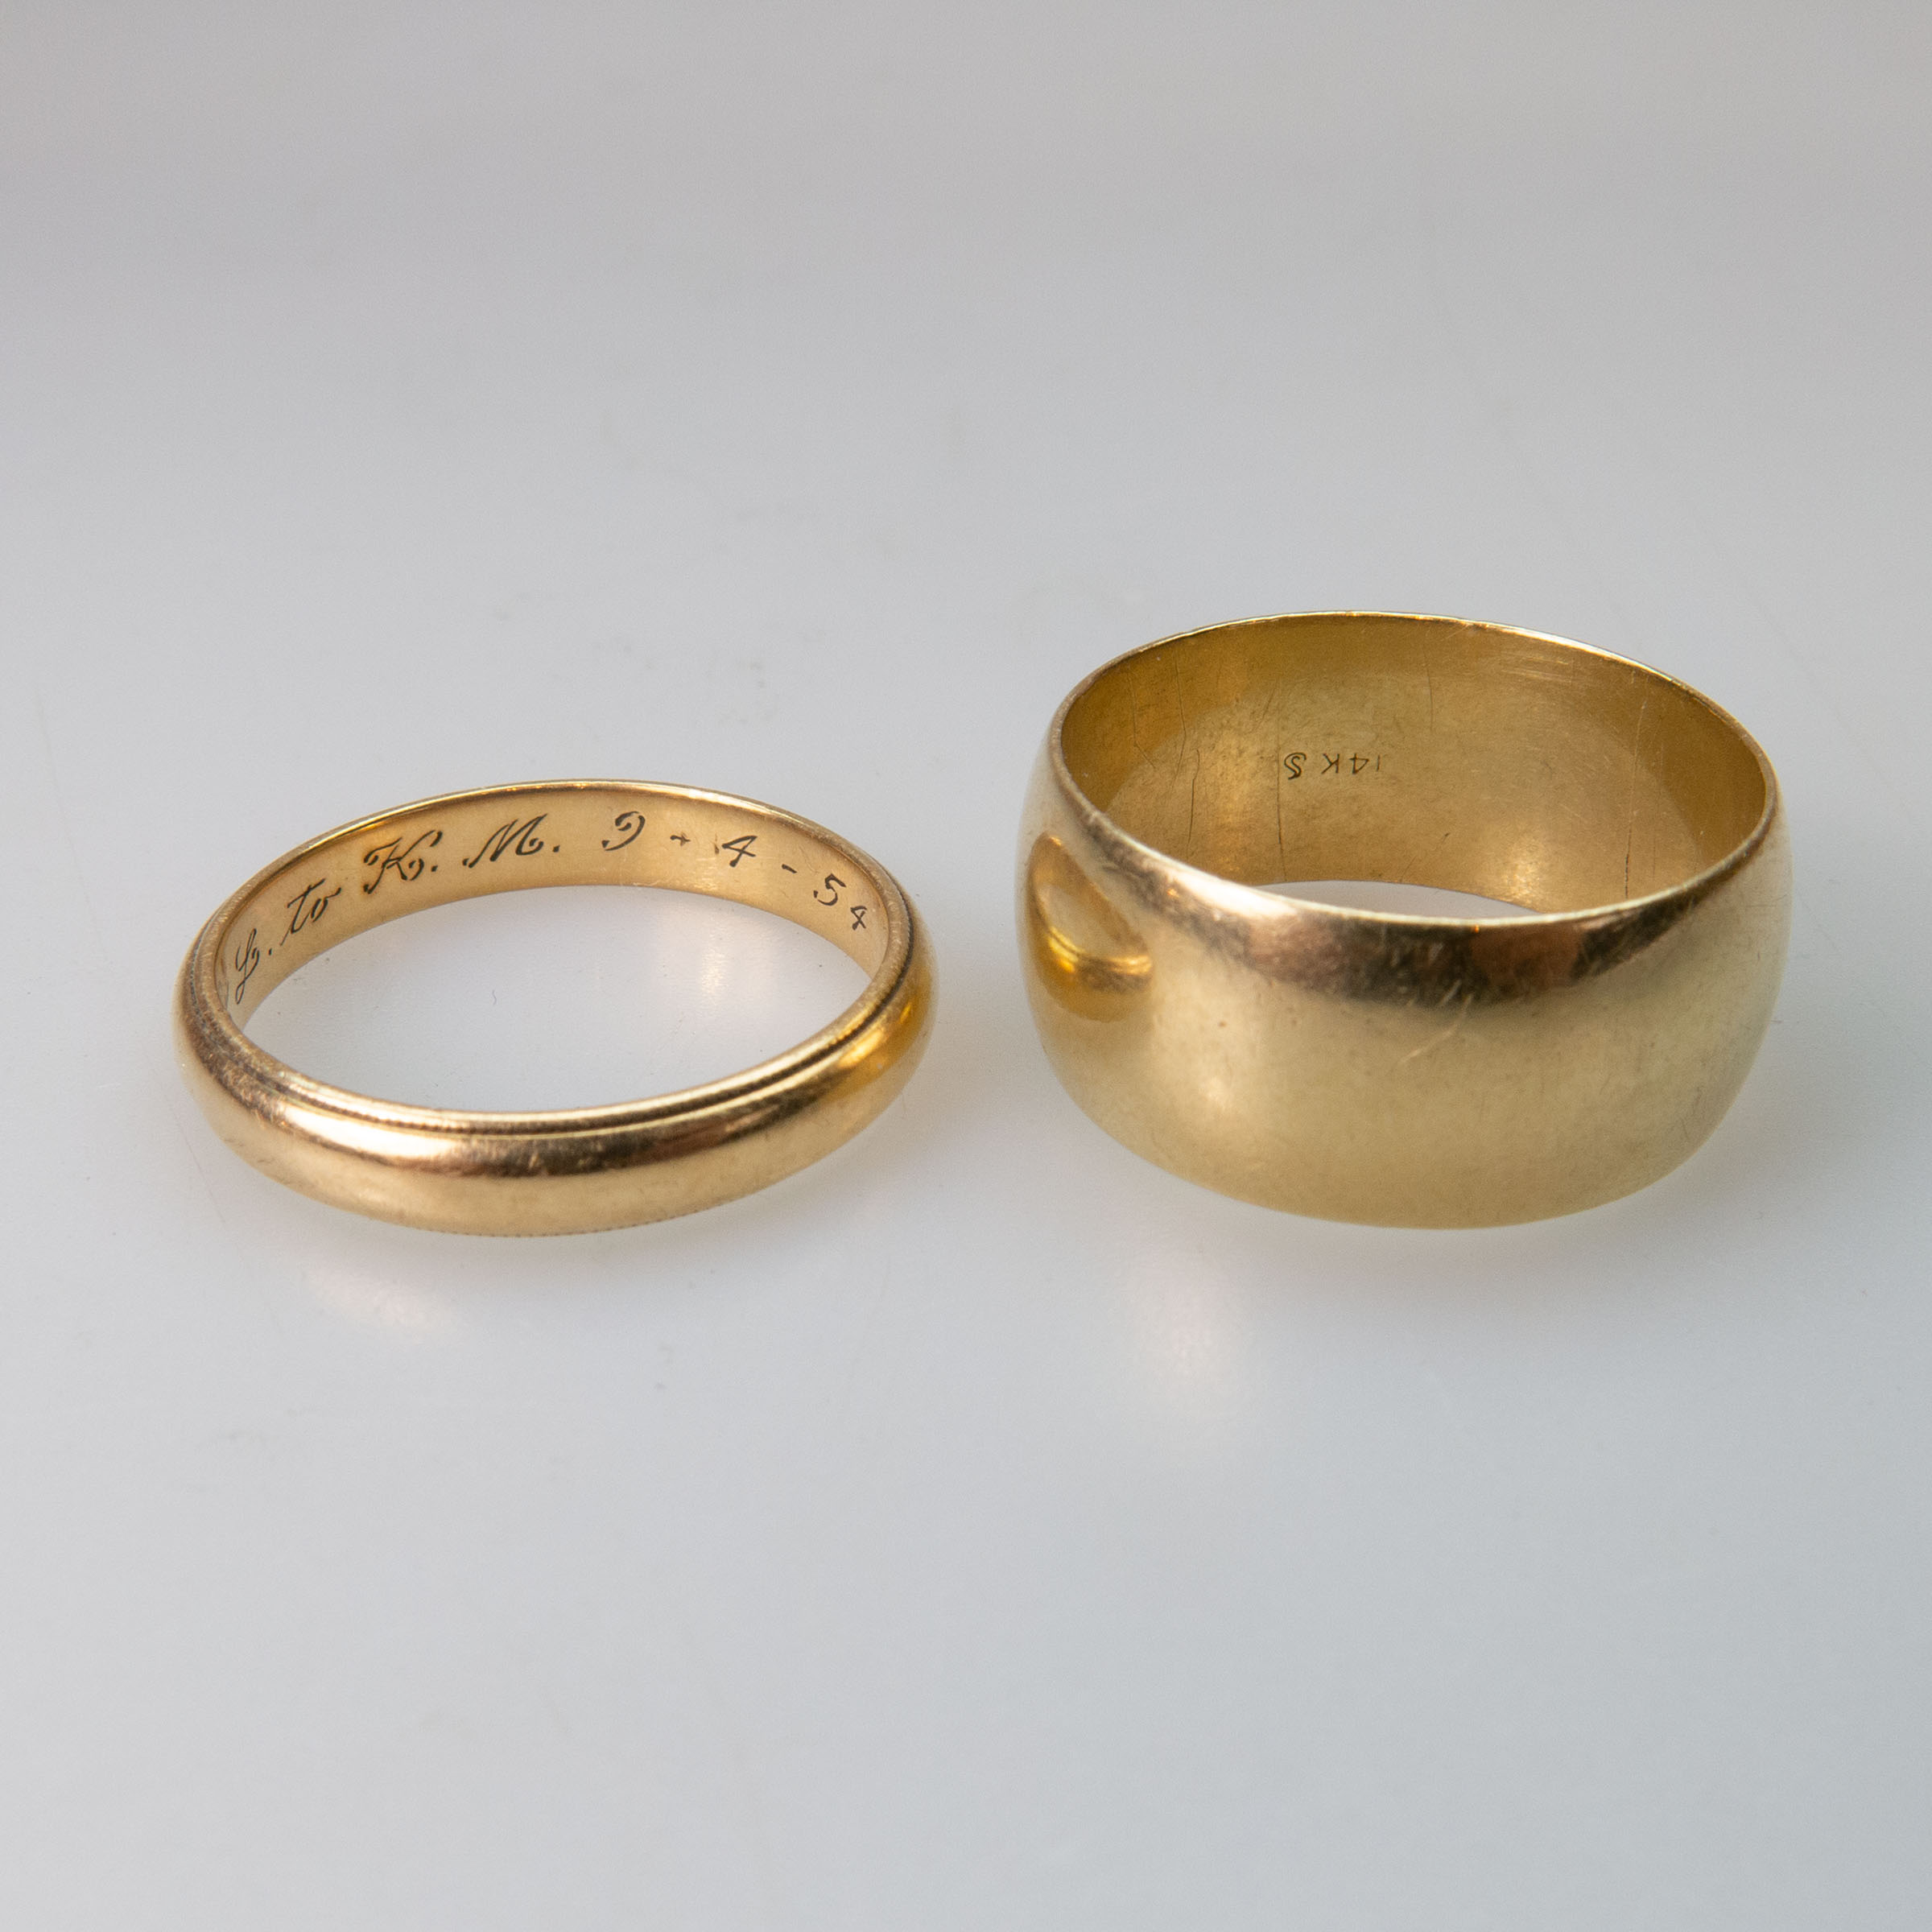 2 x 14k Yellow Gold Bands